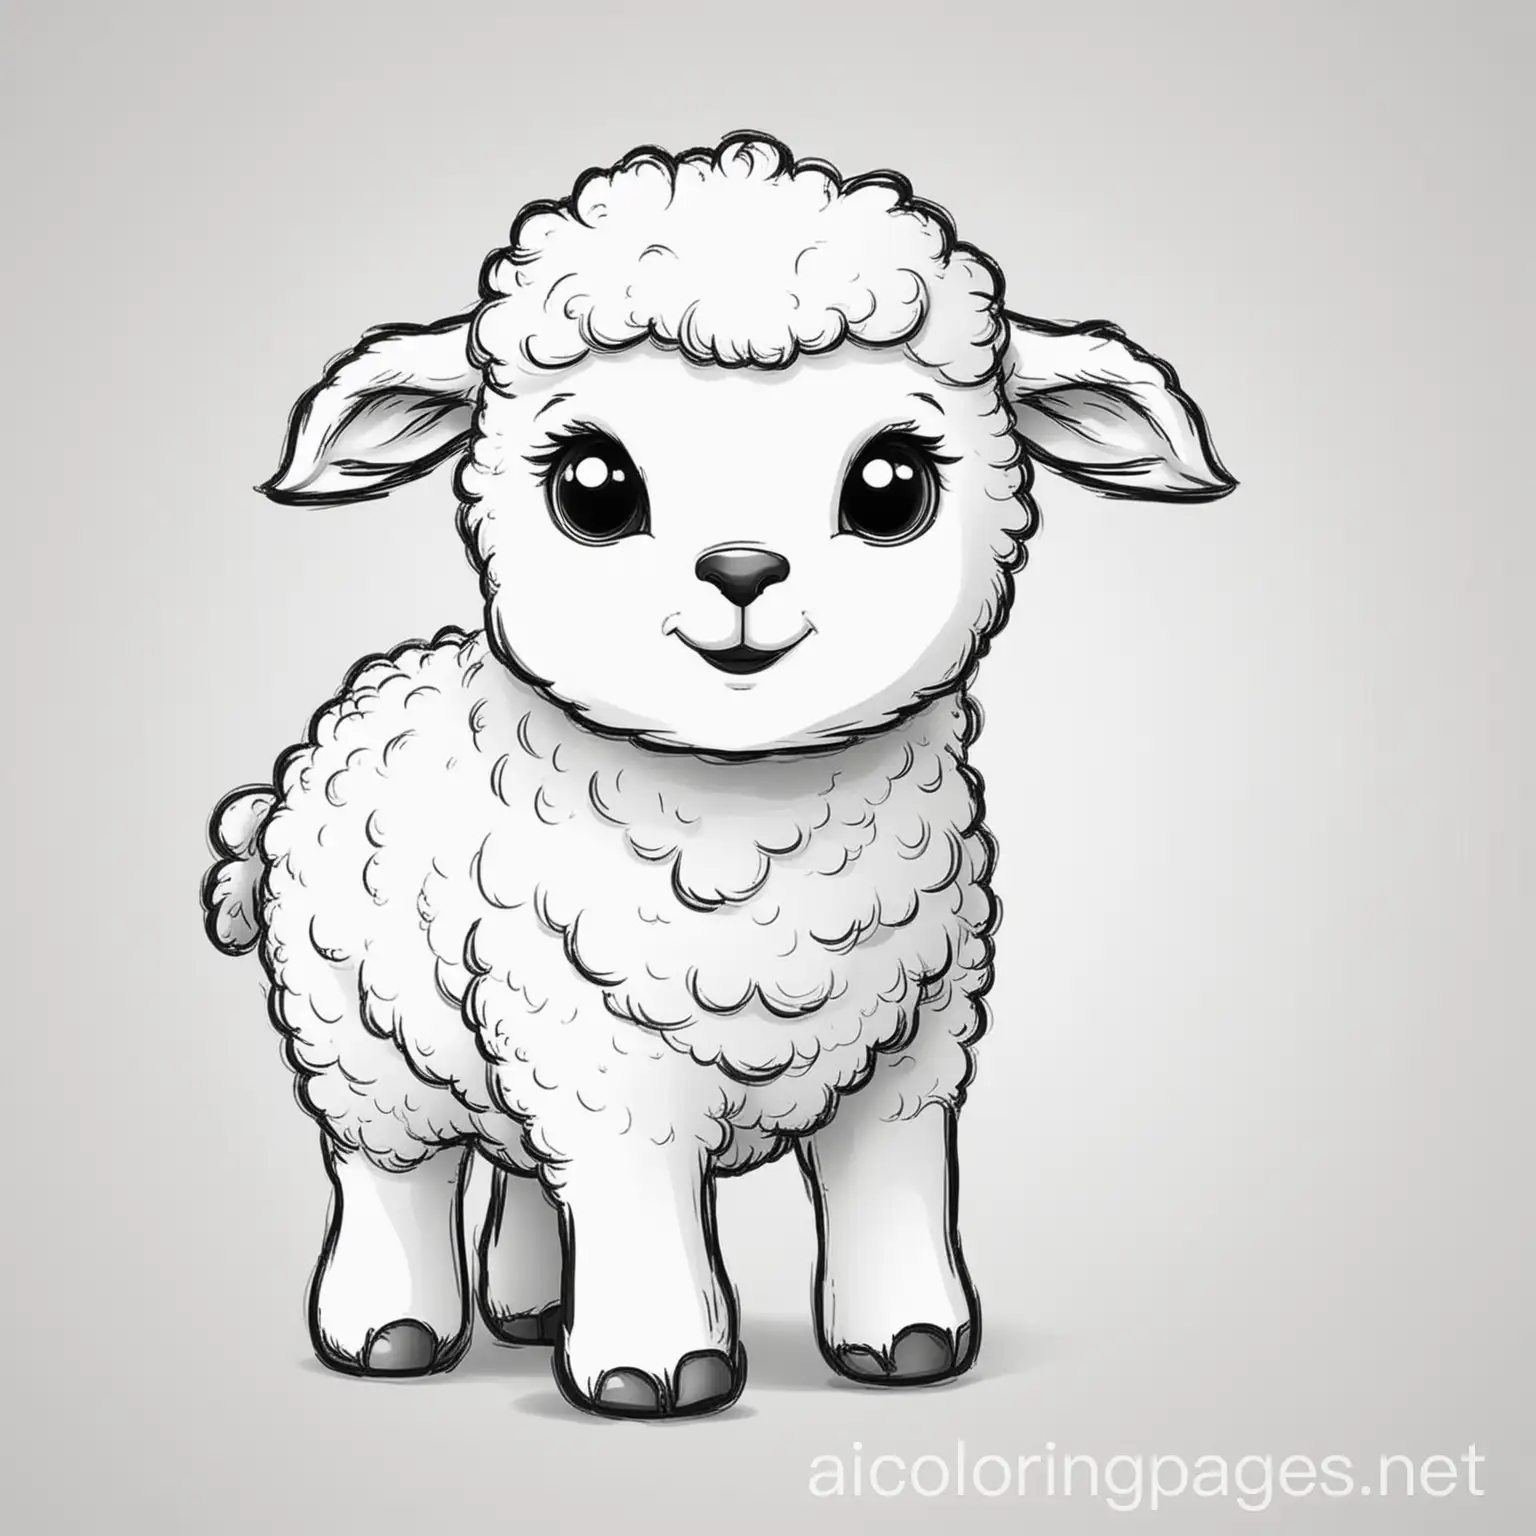 baby sheep, Coloring Page, black and white, line art, white background, Simplicity, Ample White Space, Coloring Page, black and white, line art, white background, Simplicity, Ample White Space. The background of the coloring page is plain white to make it easy for young children to color within the lines. The outlines of all the subjects are easy to distinguish, making it simple for kids to color without too much difficulty